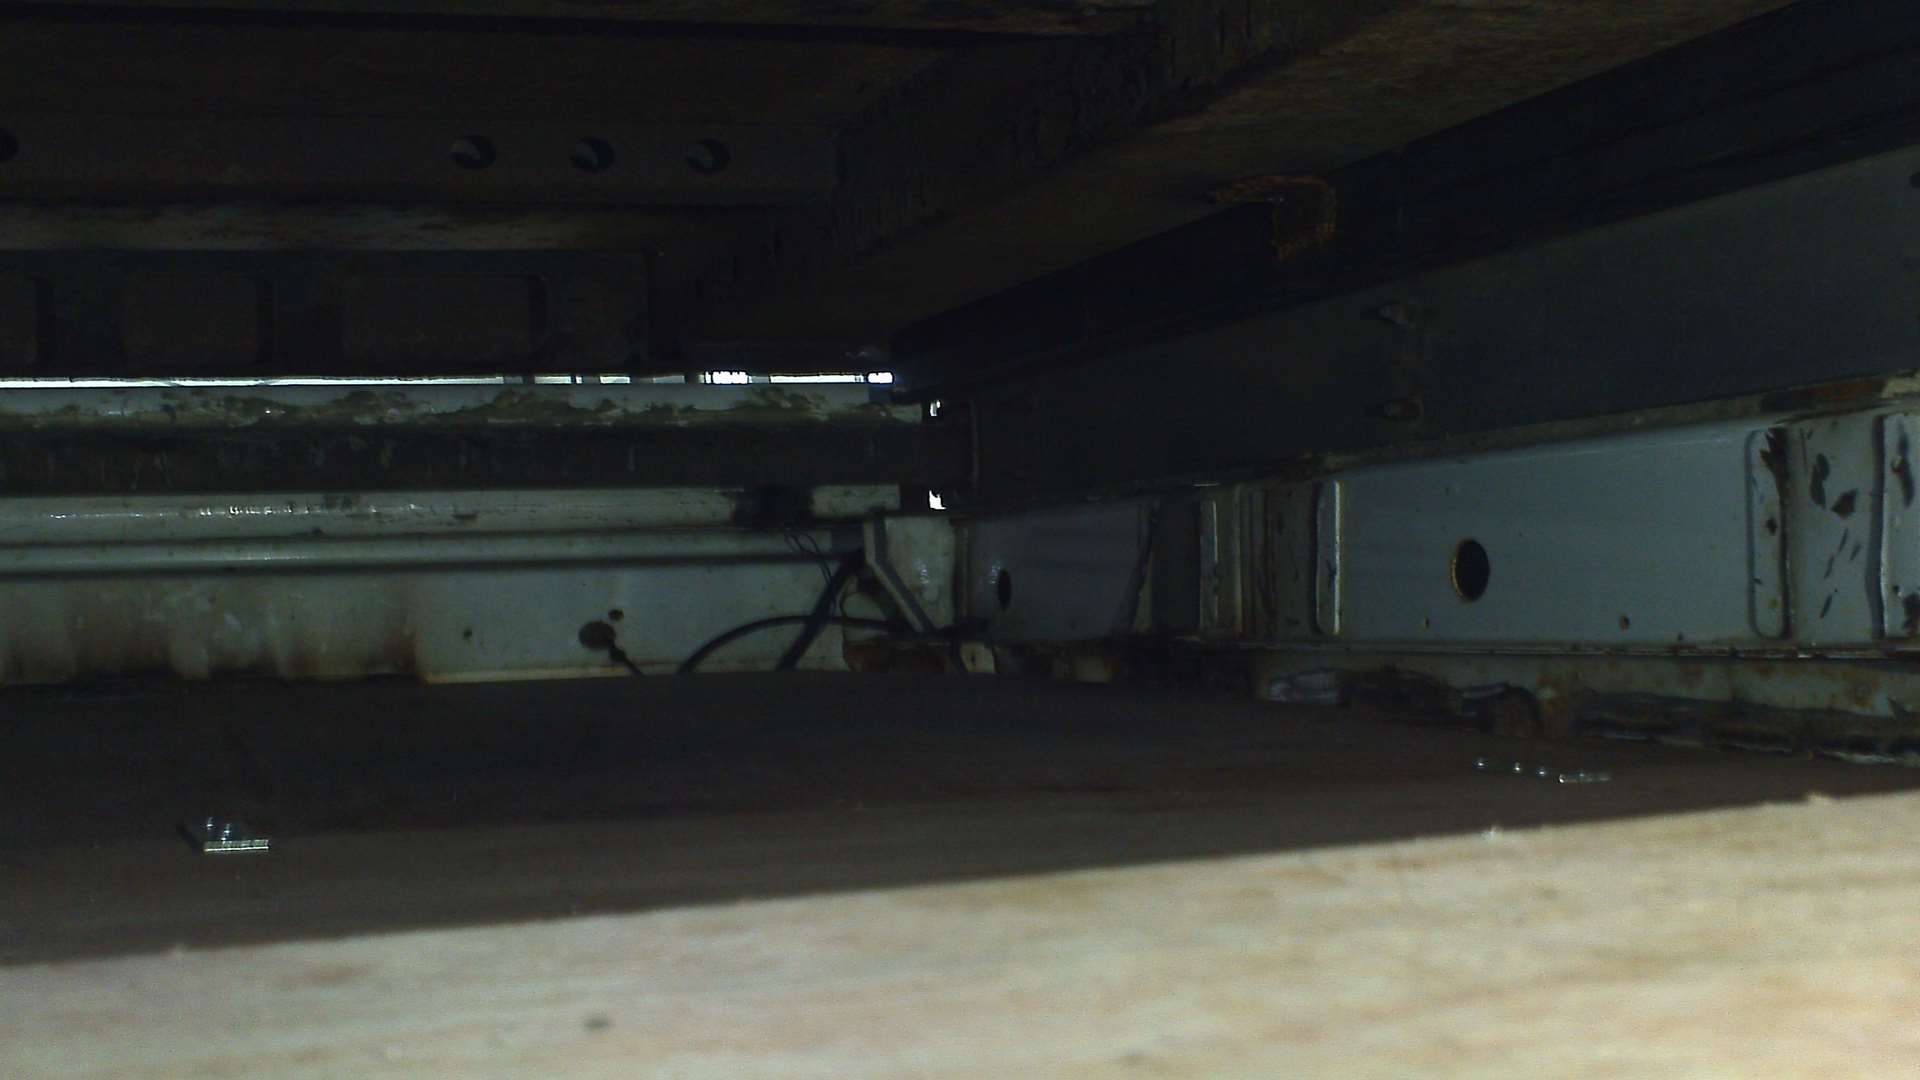 The concealed area used to hide the migrants under the flatbed lorry